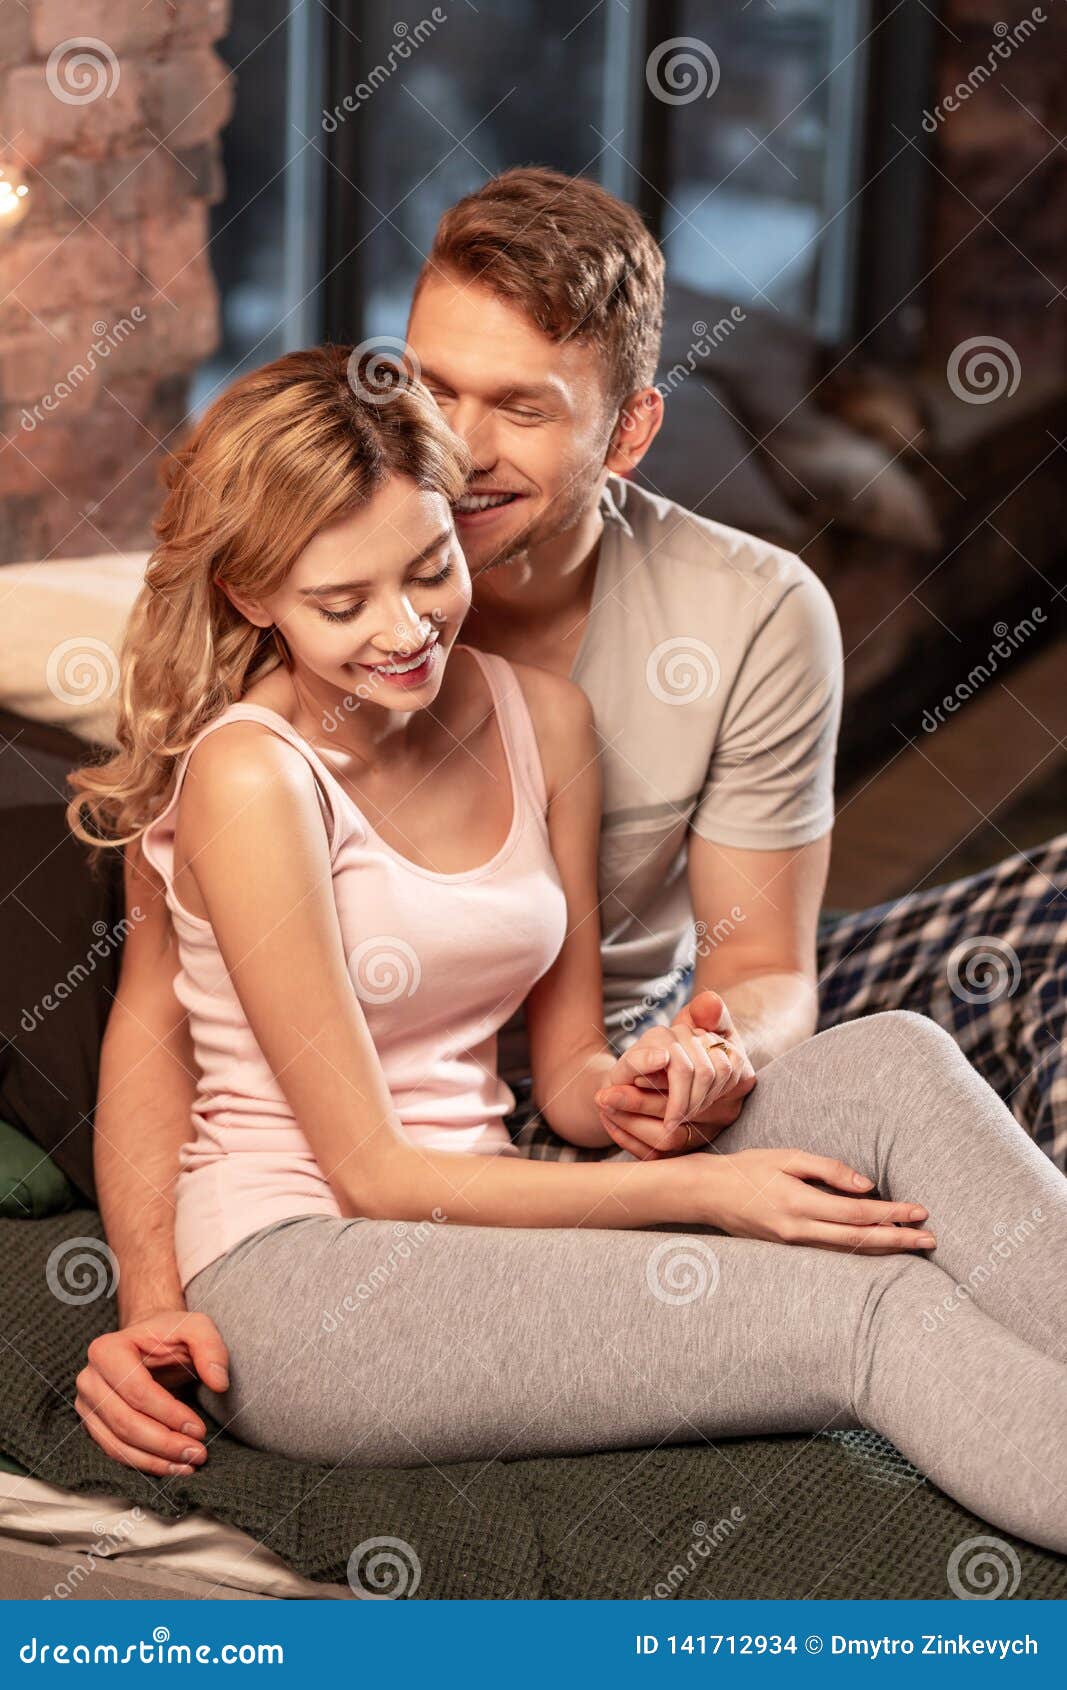 husband in bed with his wife